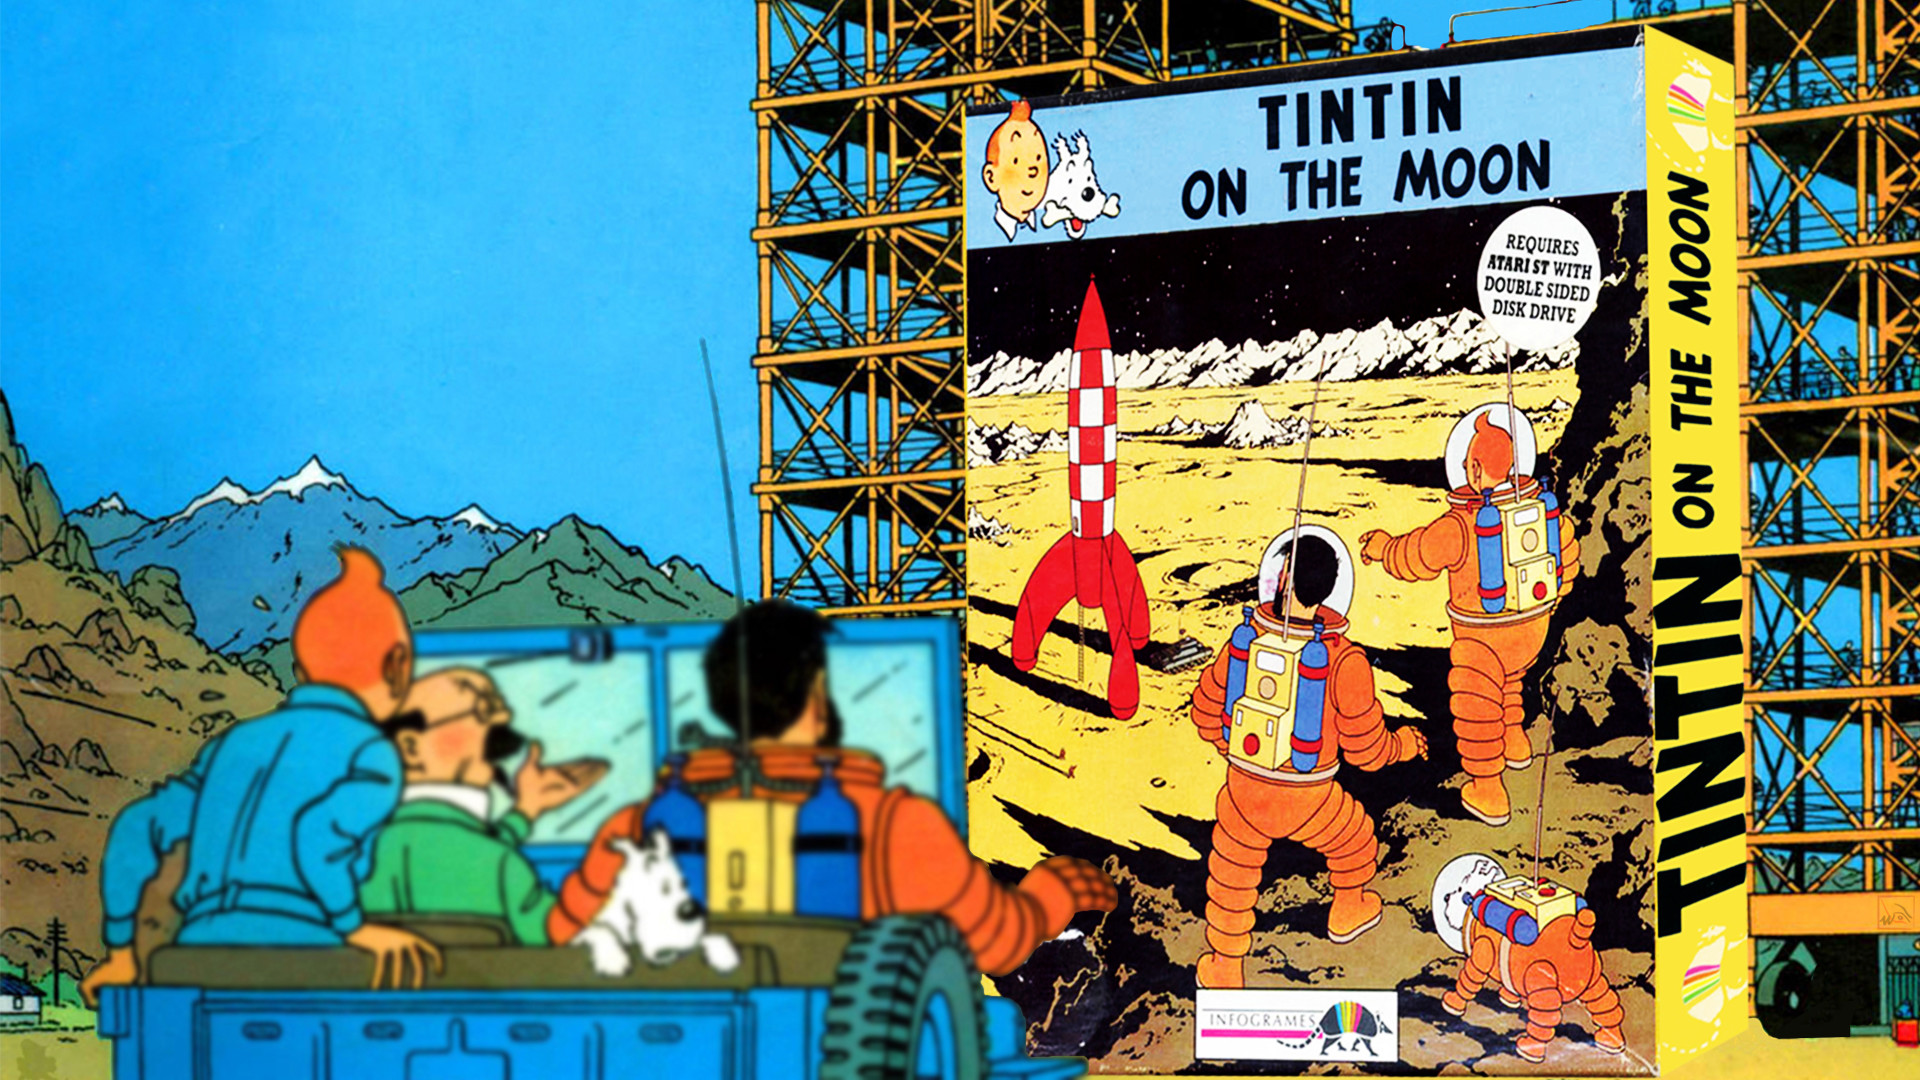 1920x1080 “Tintin on the Moon (“Tintin sur la Lune”) is a shoot 'em up/side scroller  game released by Infogrames in 1989 on the Atari ST. Download